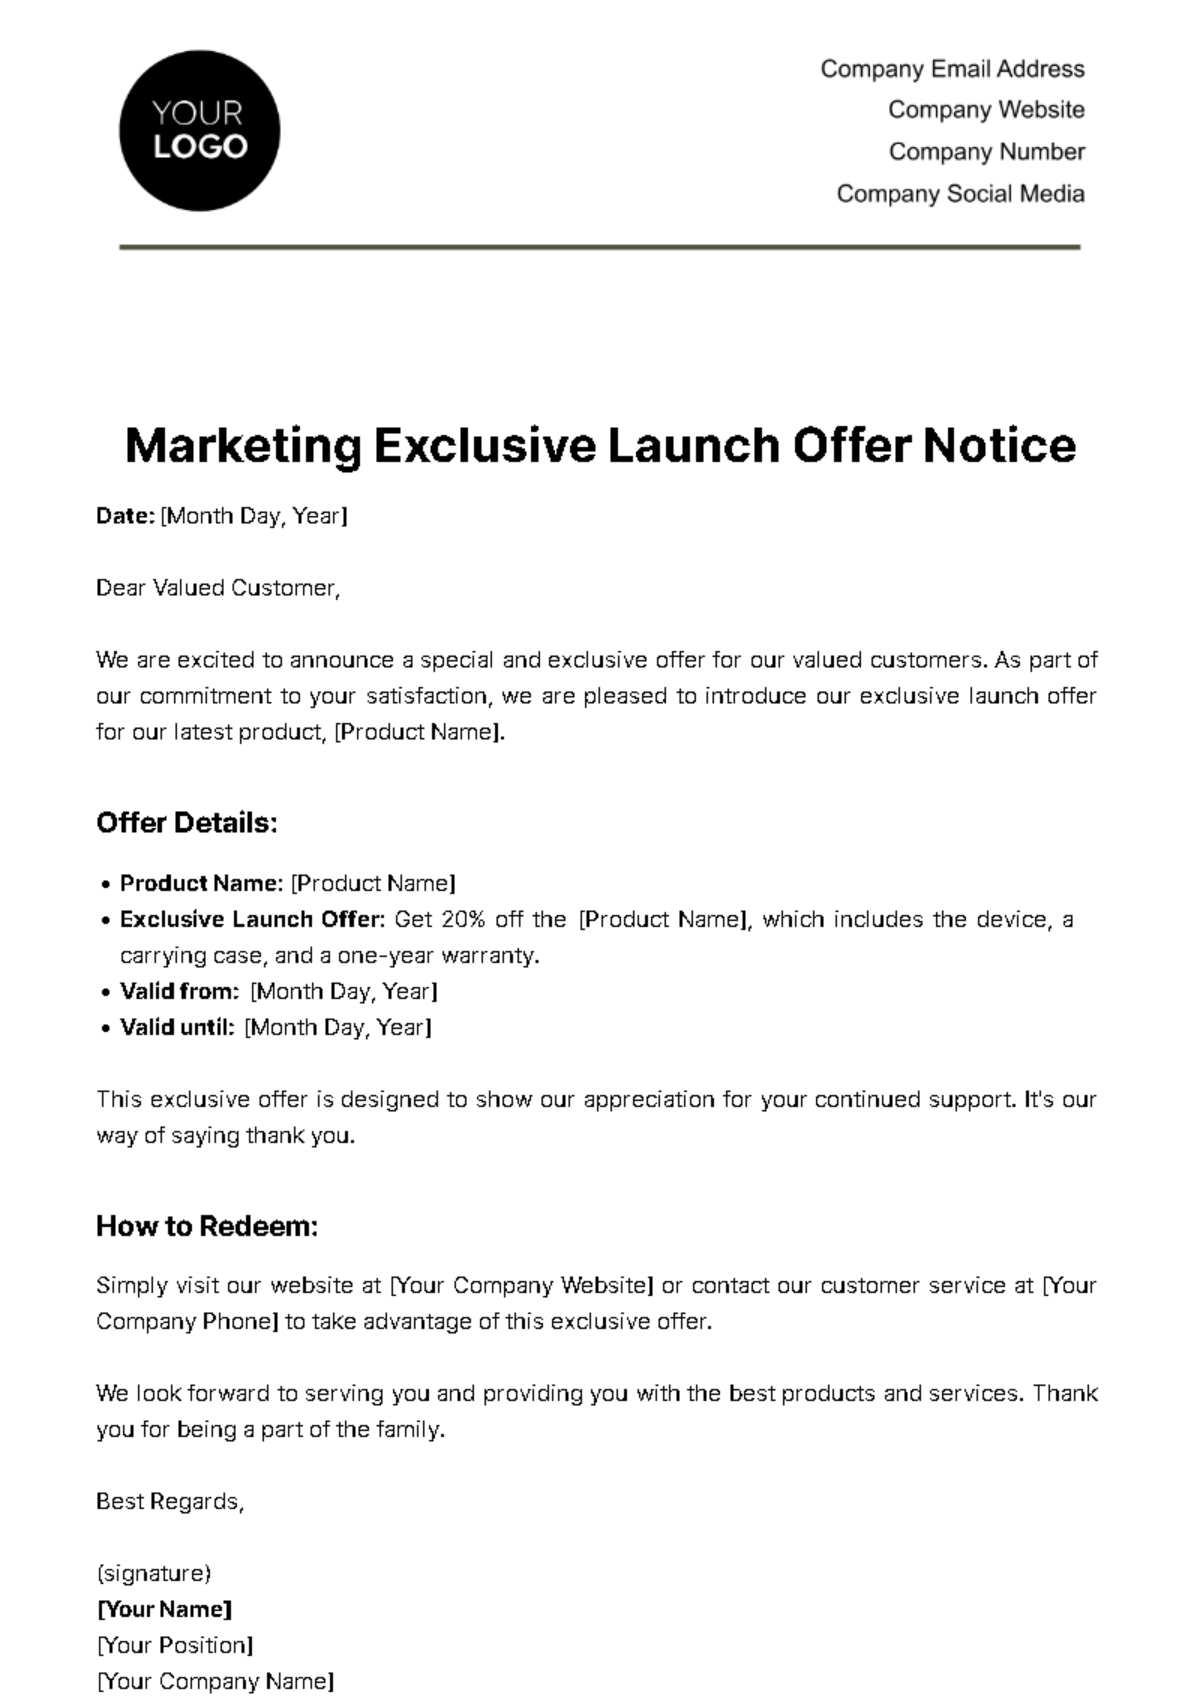 Free Marketing Exclusive Launch Offer Notice Template